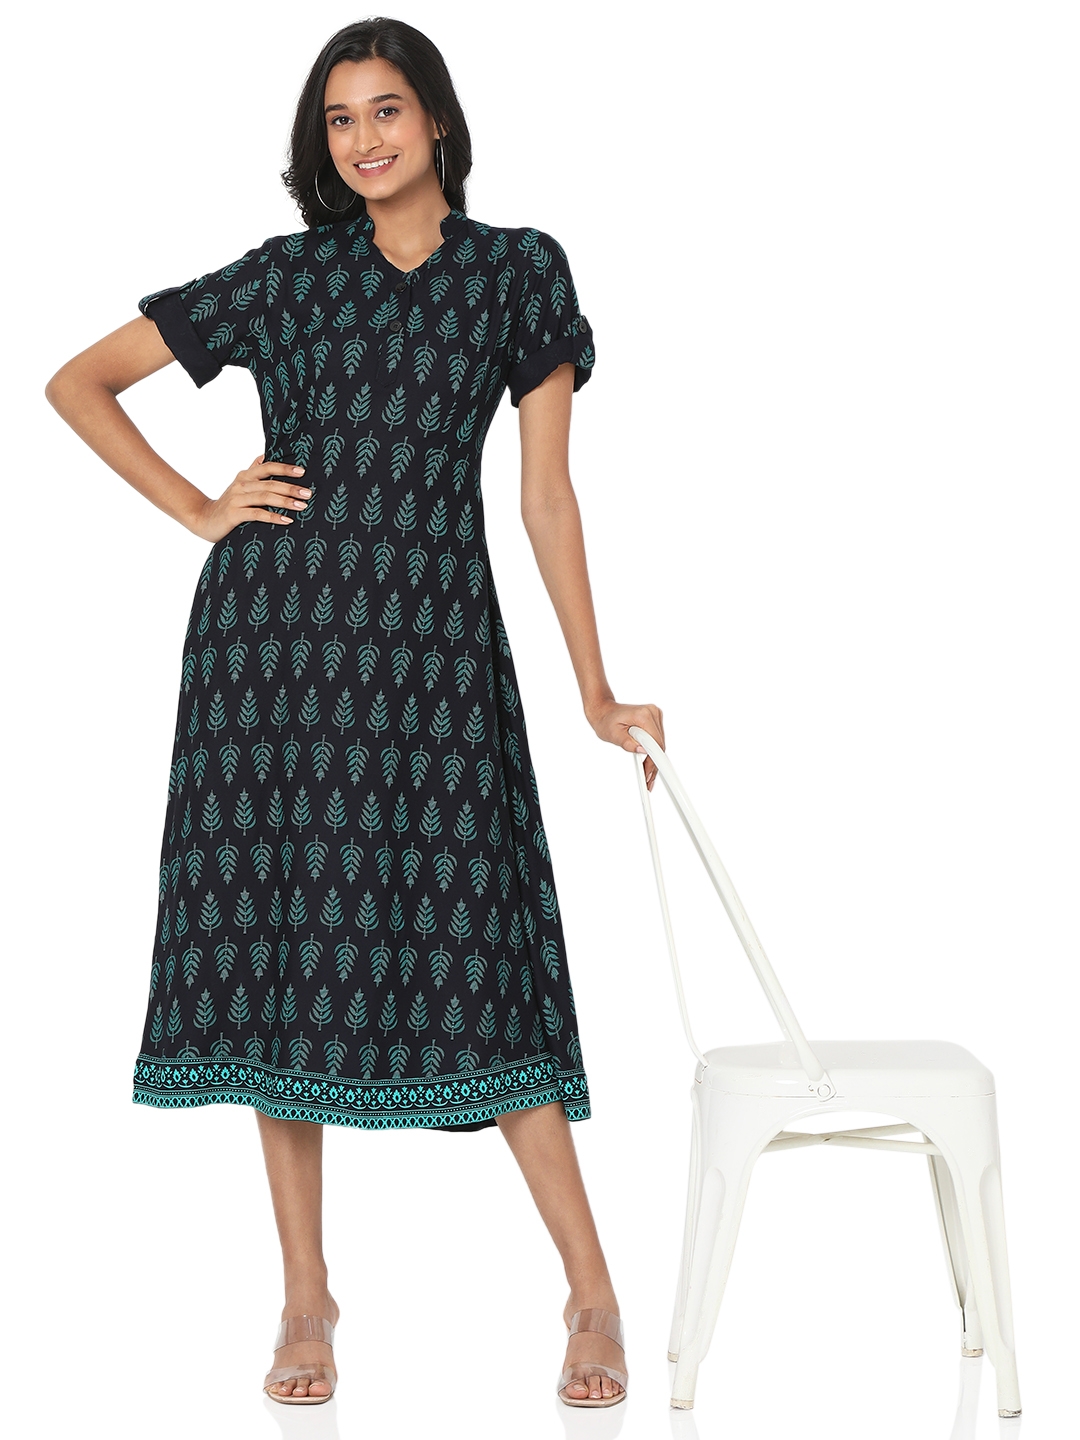 Smarty Pants | Smarty Pants women's cotton fabric green color alpine tree printed dress. 5